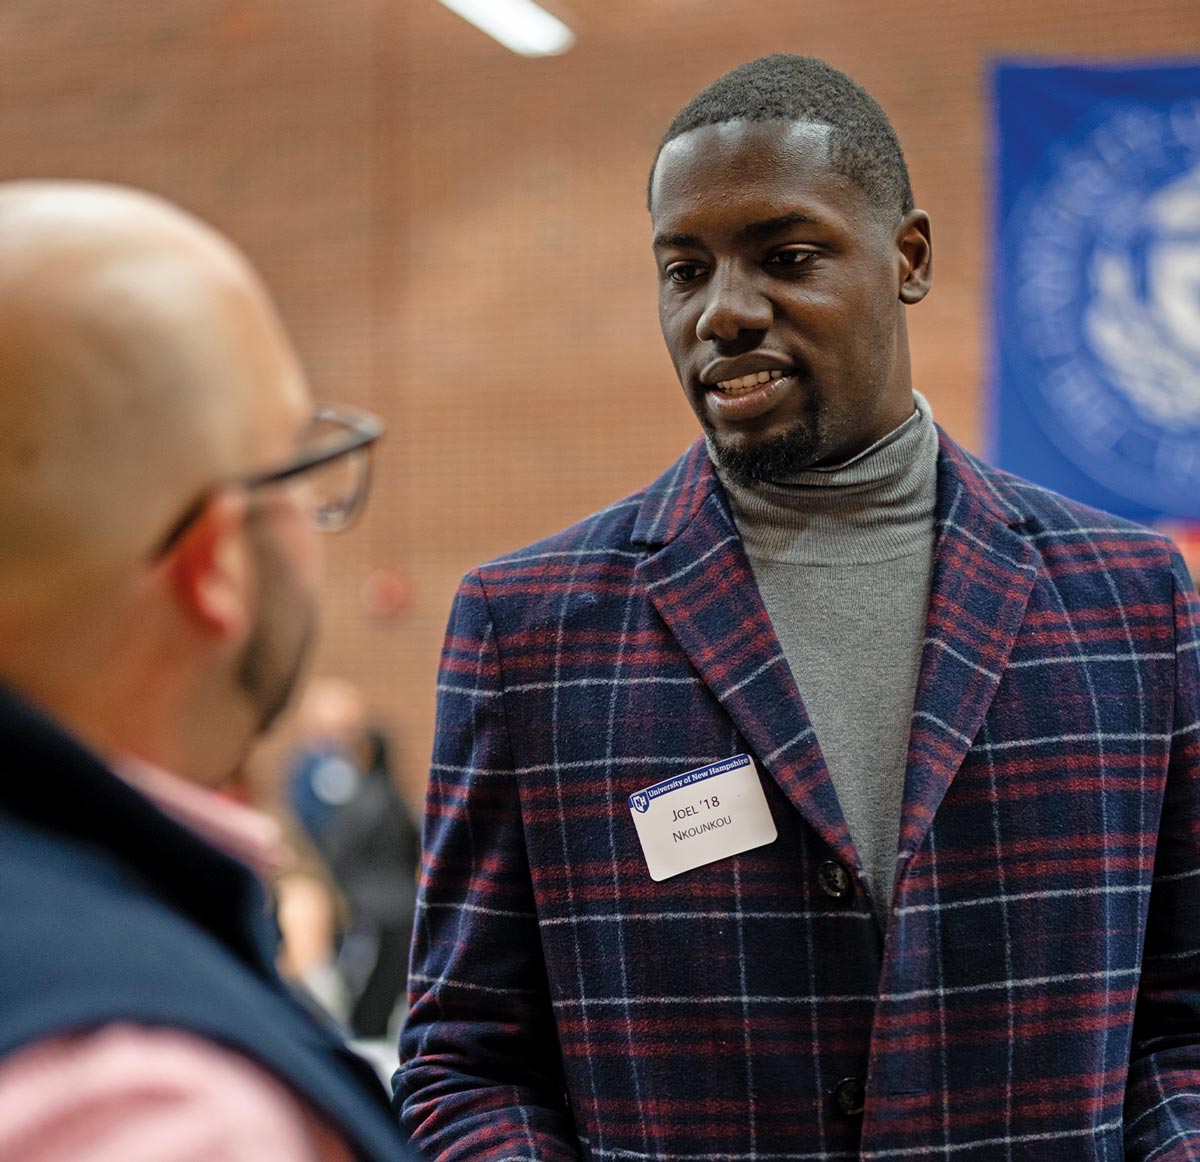 Alumni Board member Joël Nkounkou wears a red and navy plaid suit and speaks to Shersingh Joseph Tumber-Dávila ’15PhD who stands in the foreground